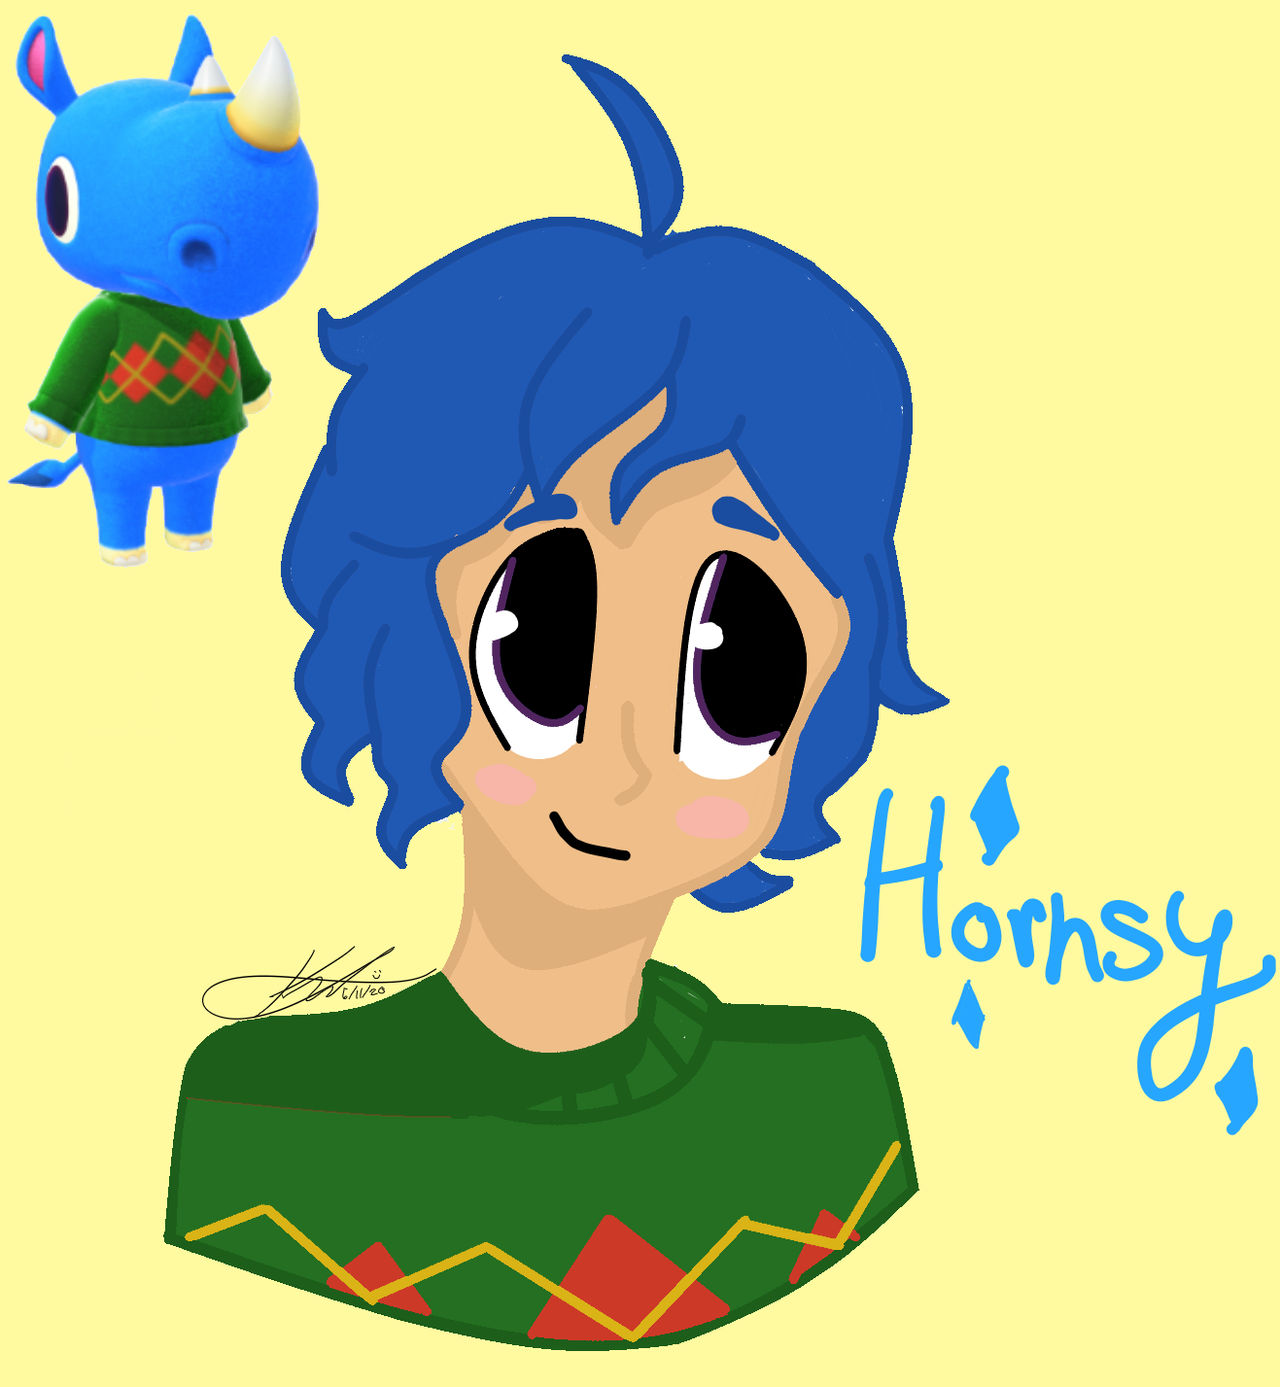 Hornsby from Animal Crossing by KristiHaru on DeviantArt